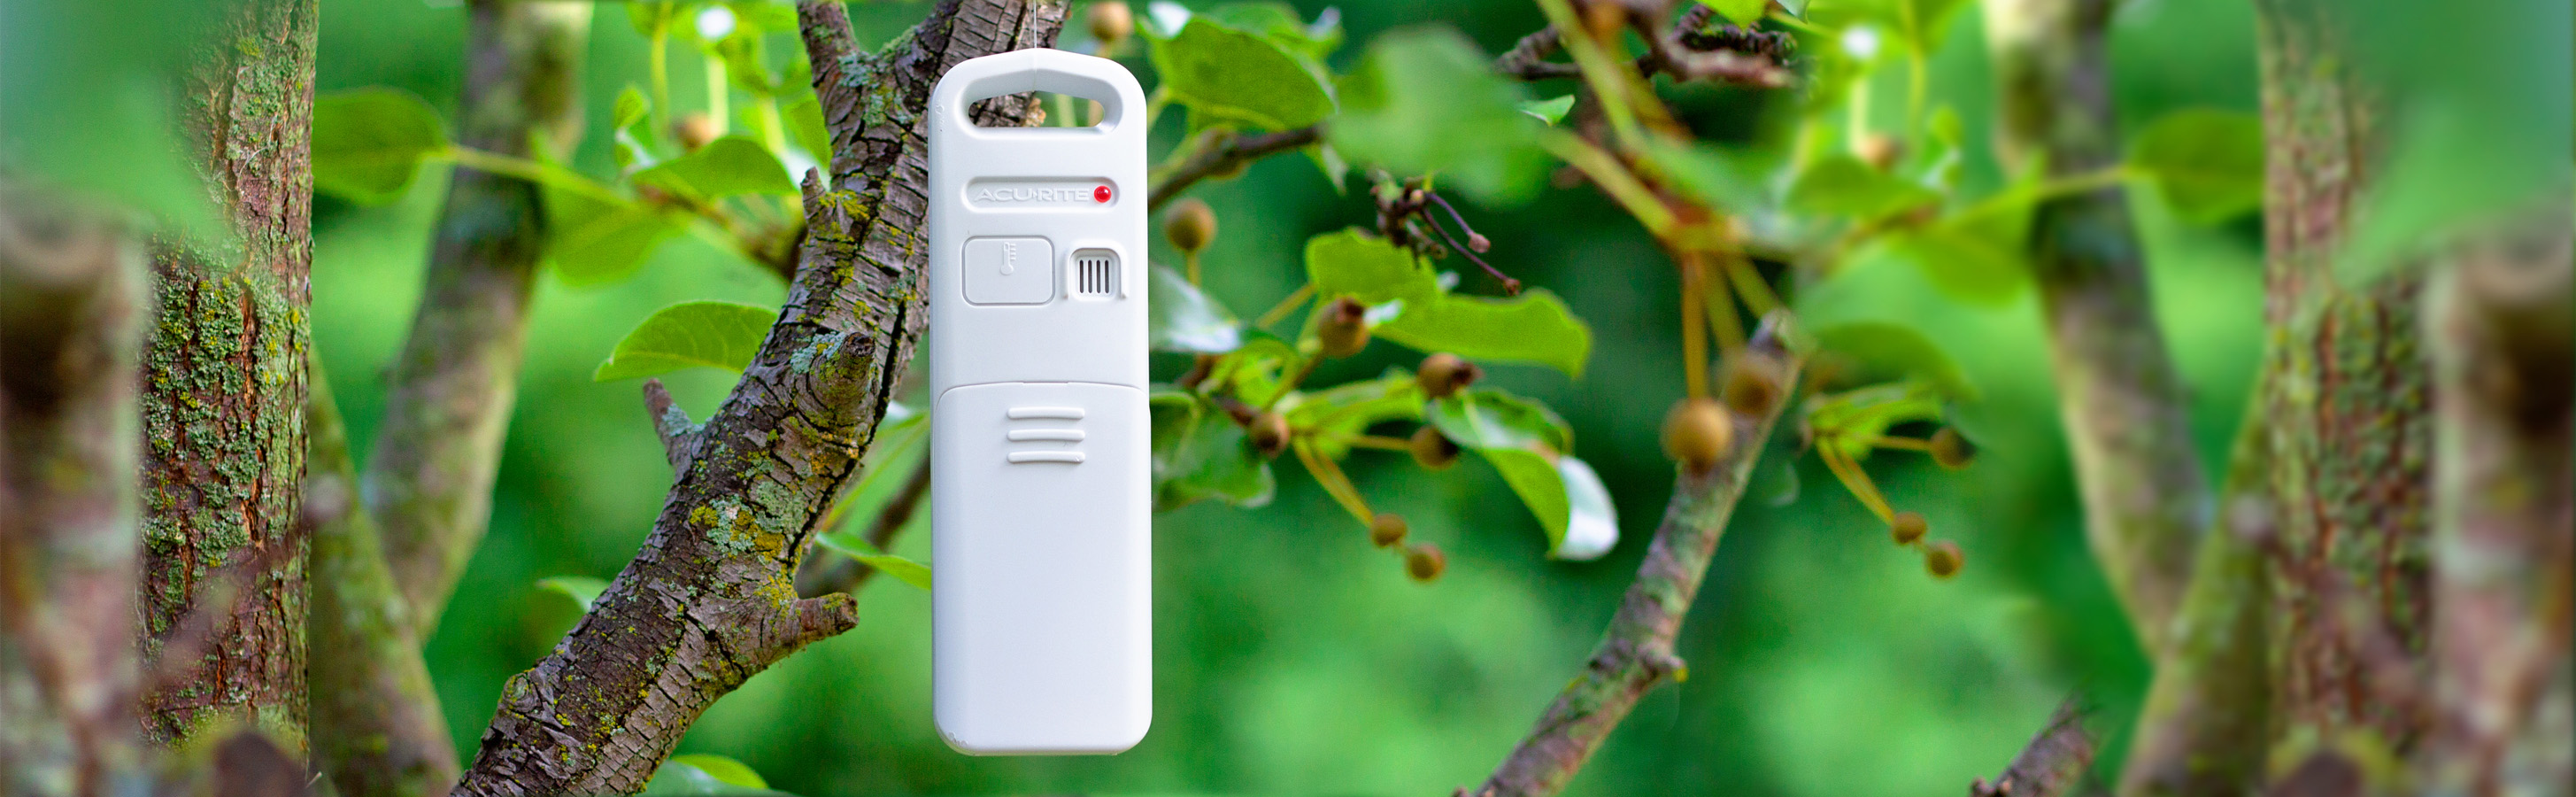 Wireless Temperature and Humidity Sensor banner - AcuRite Weather Monitoring Devices